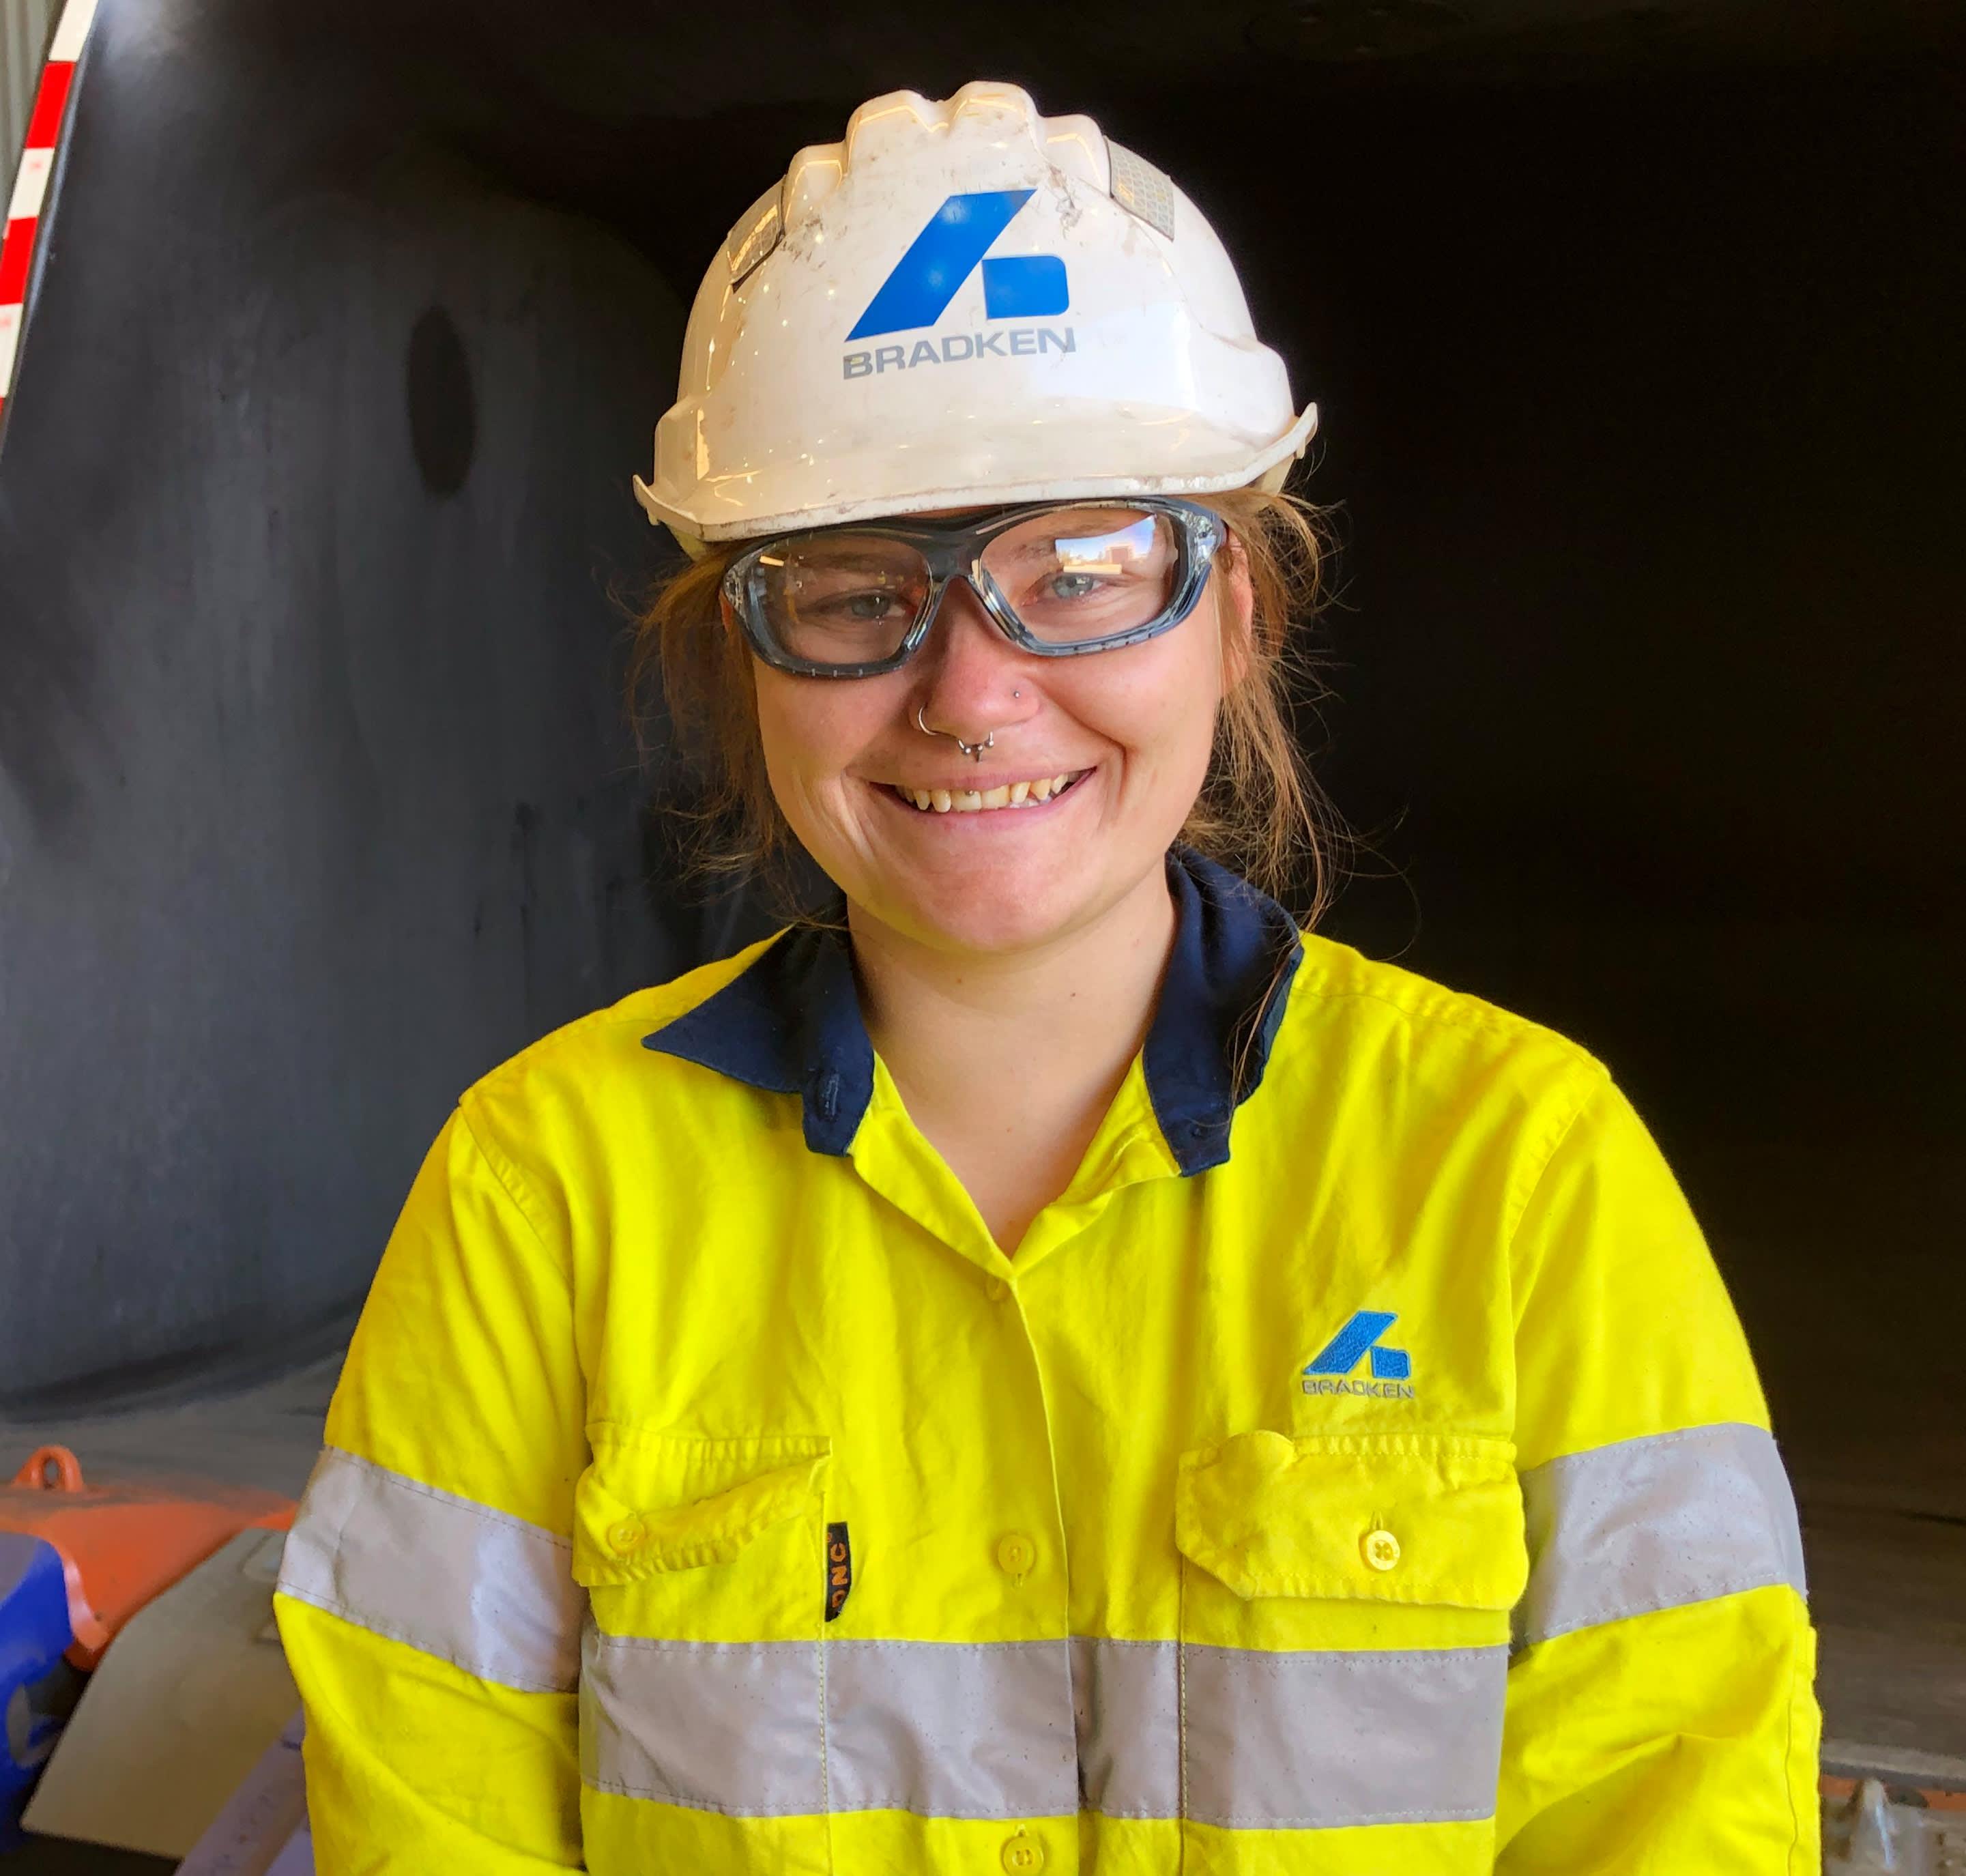 2023 First year Boilermaker apprentice Elizabeth Ball from Mt Thorley